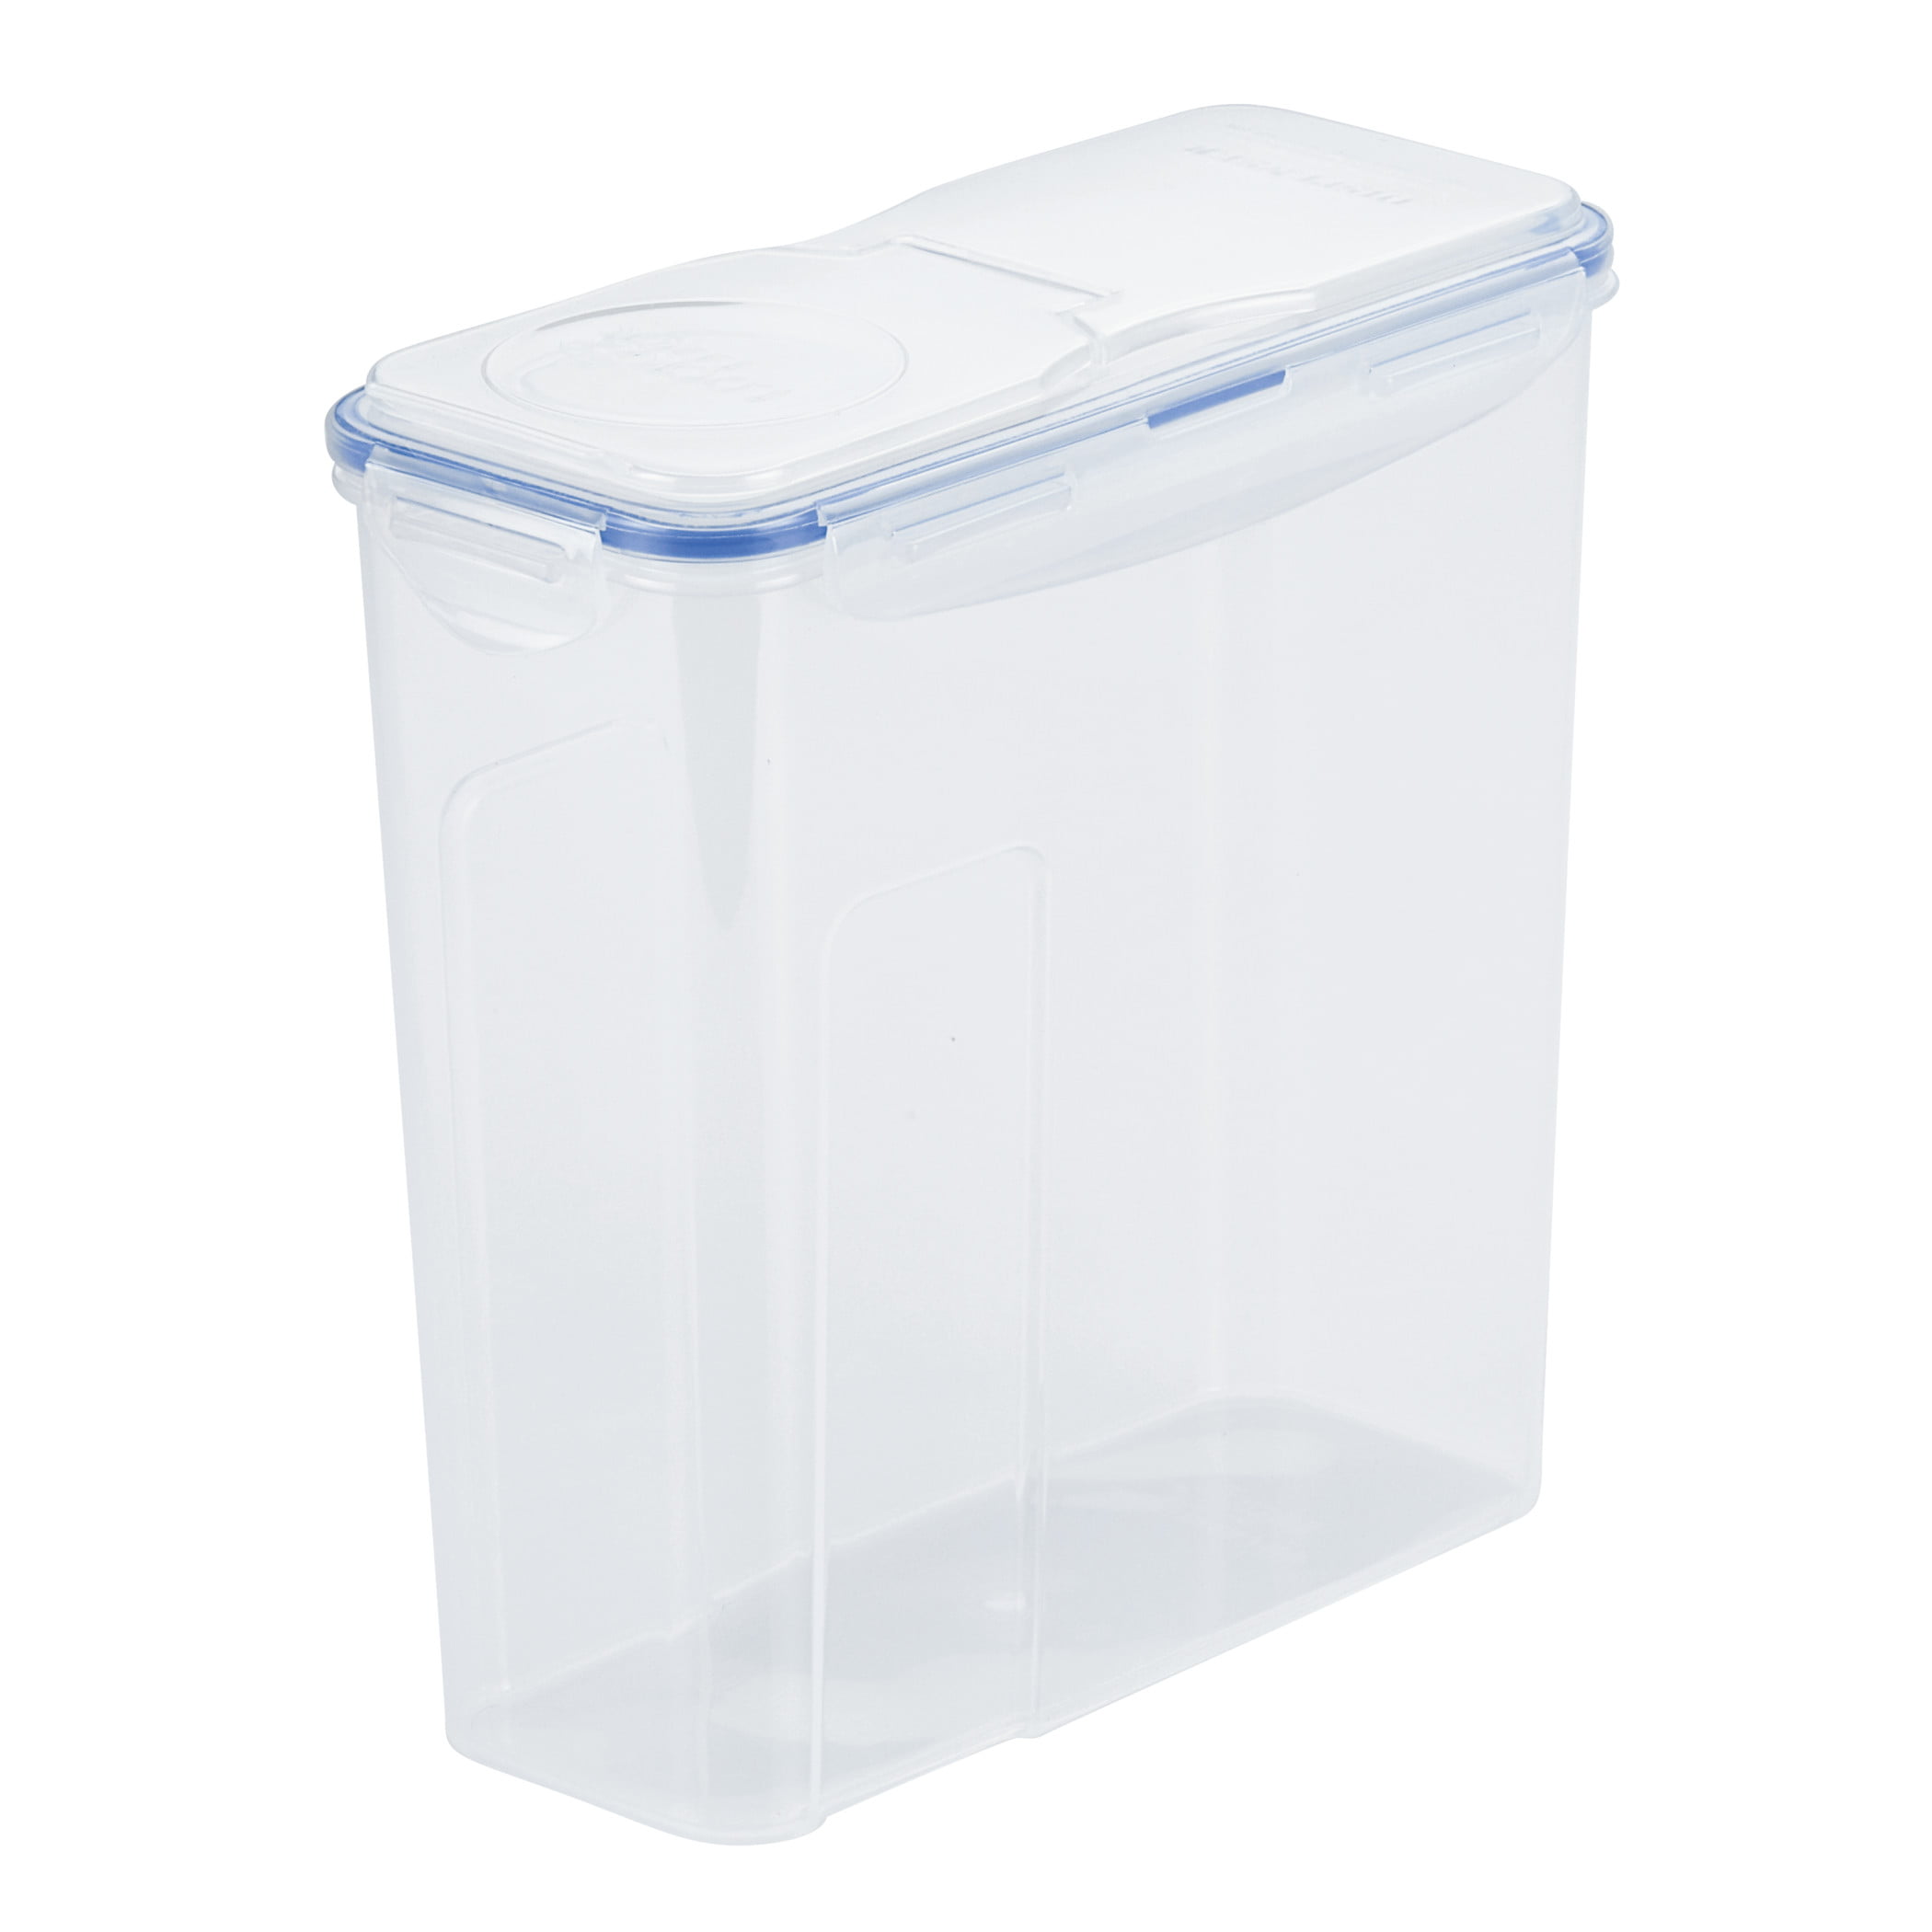 16.5-cup / 132-oz Lock & Lock Cereal Dispenser Container Pack of 2 HPL951